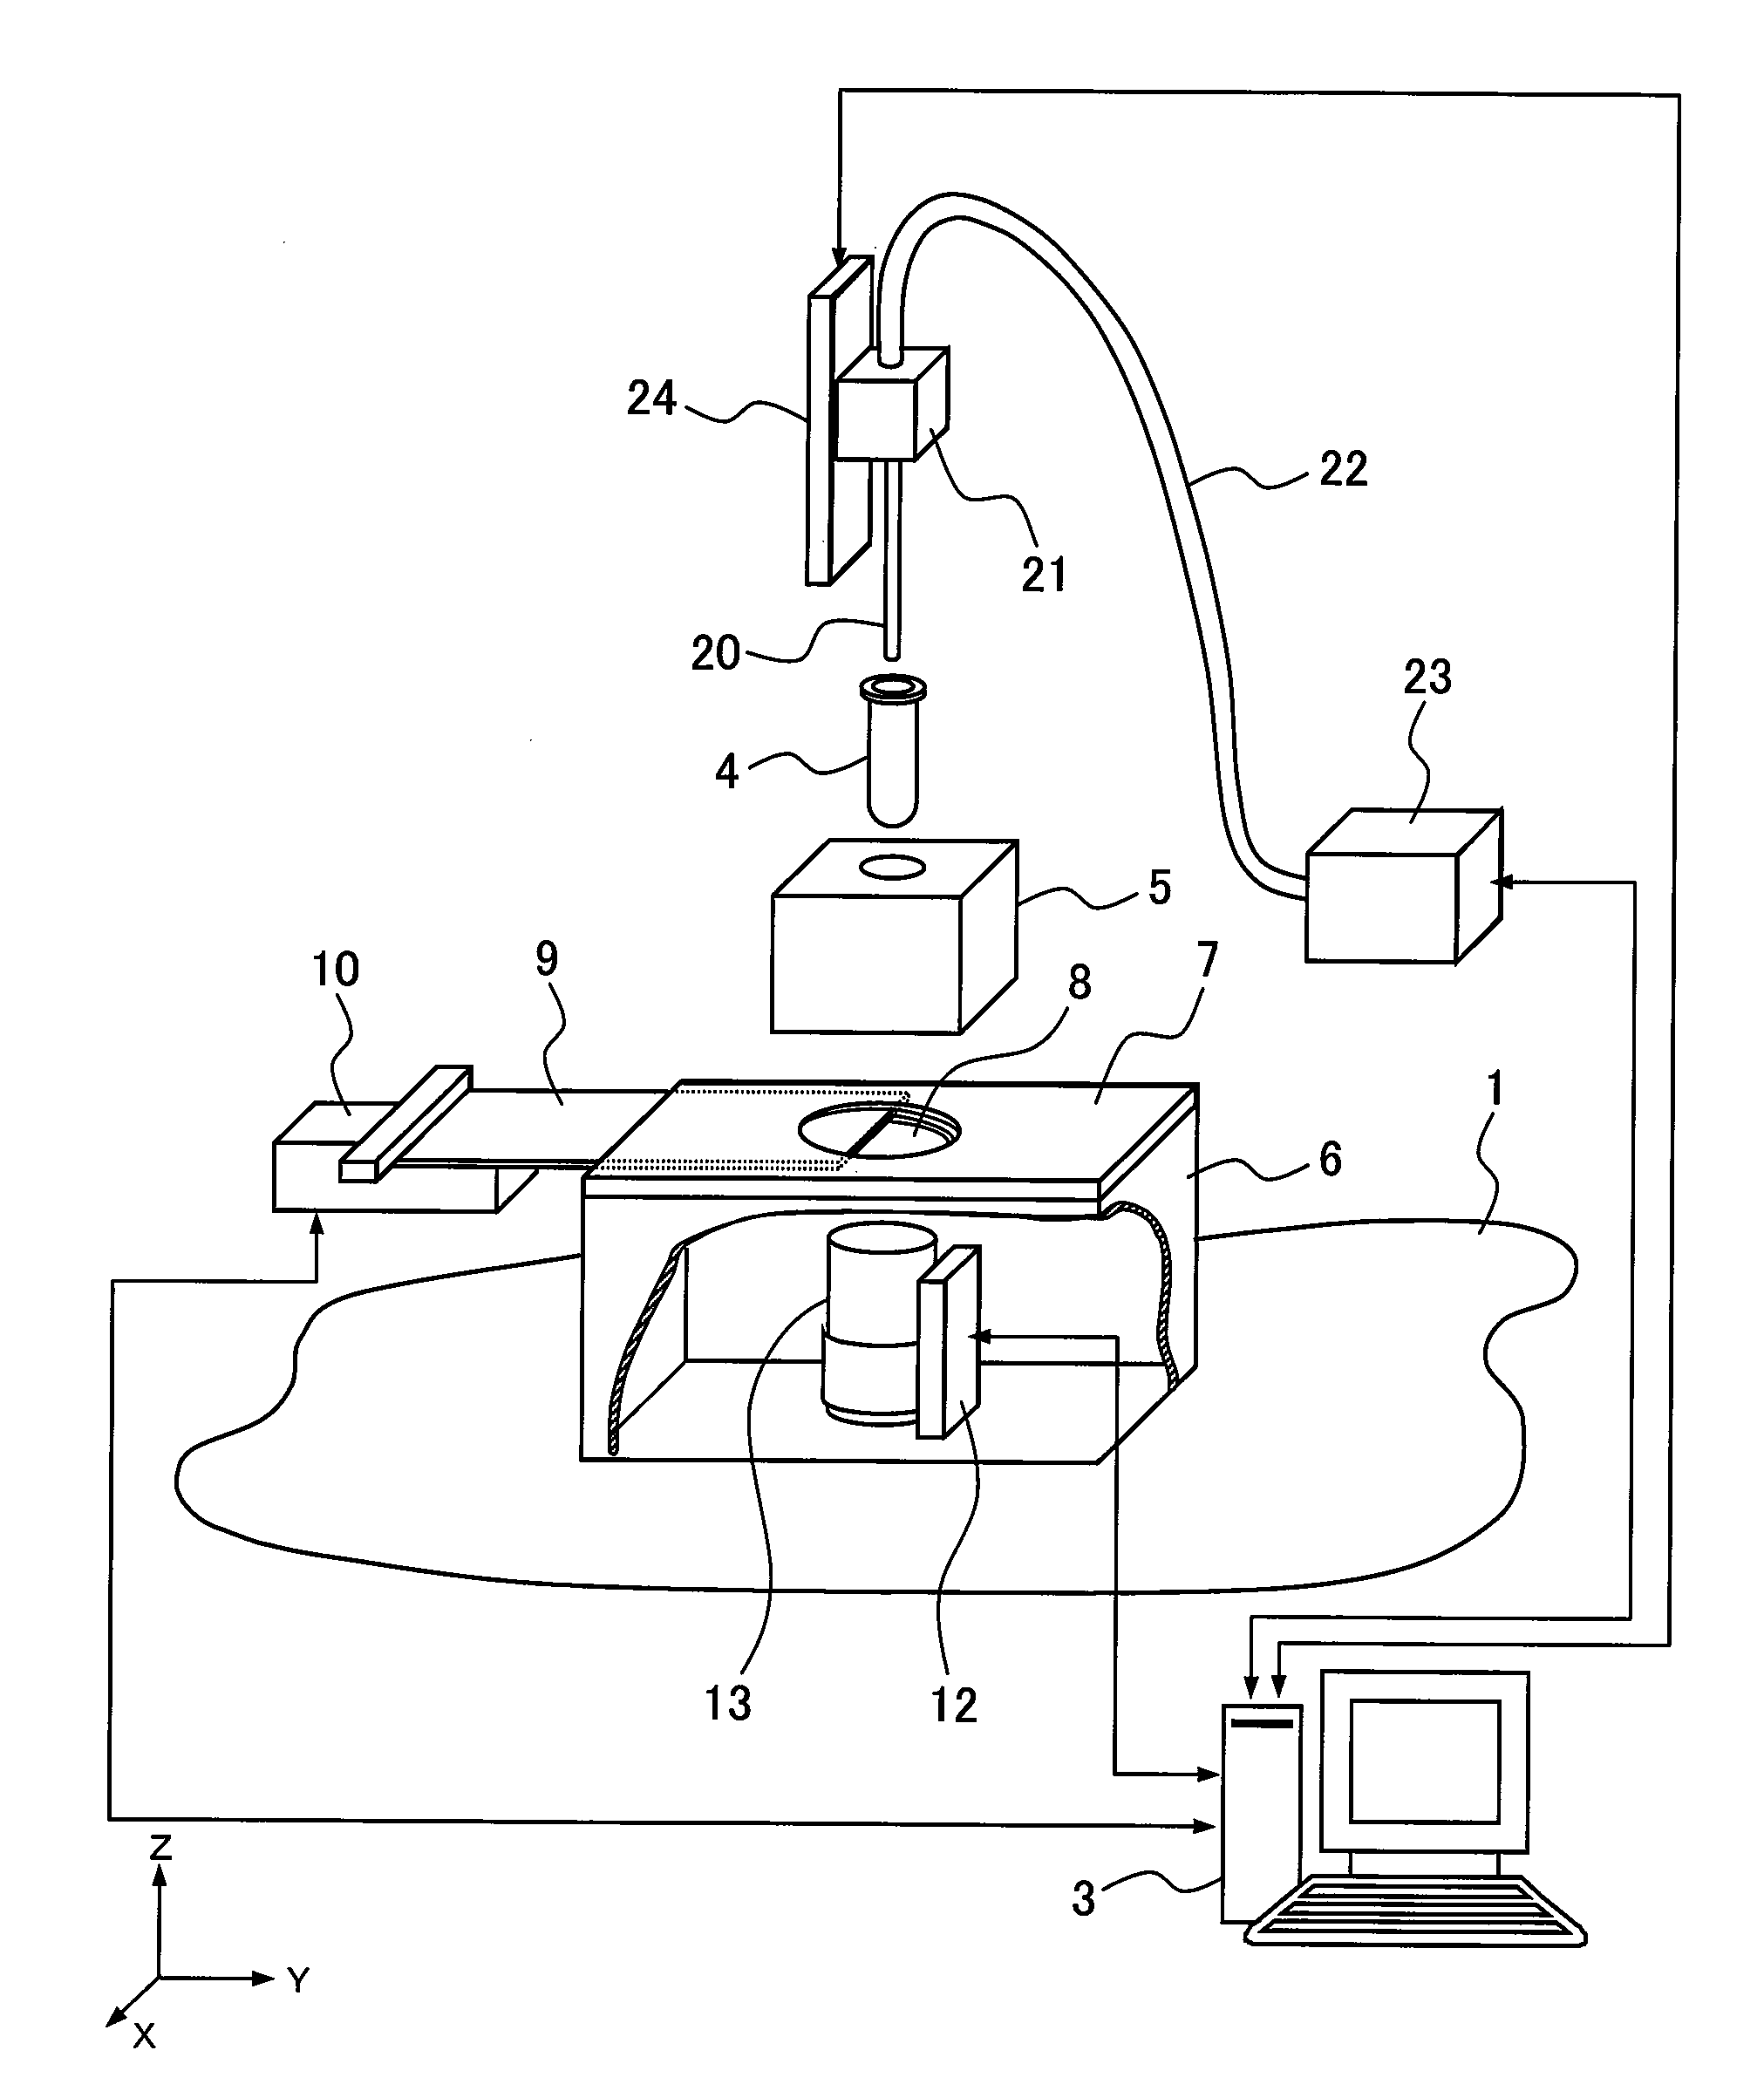 Apparatus for chemiluminescent assay and detection